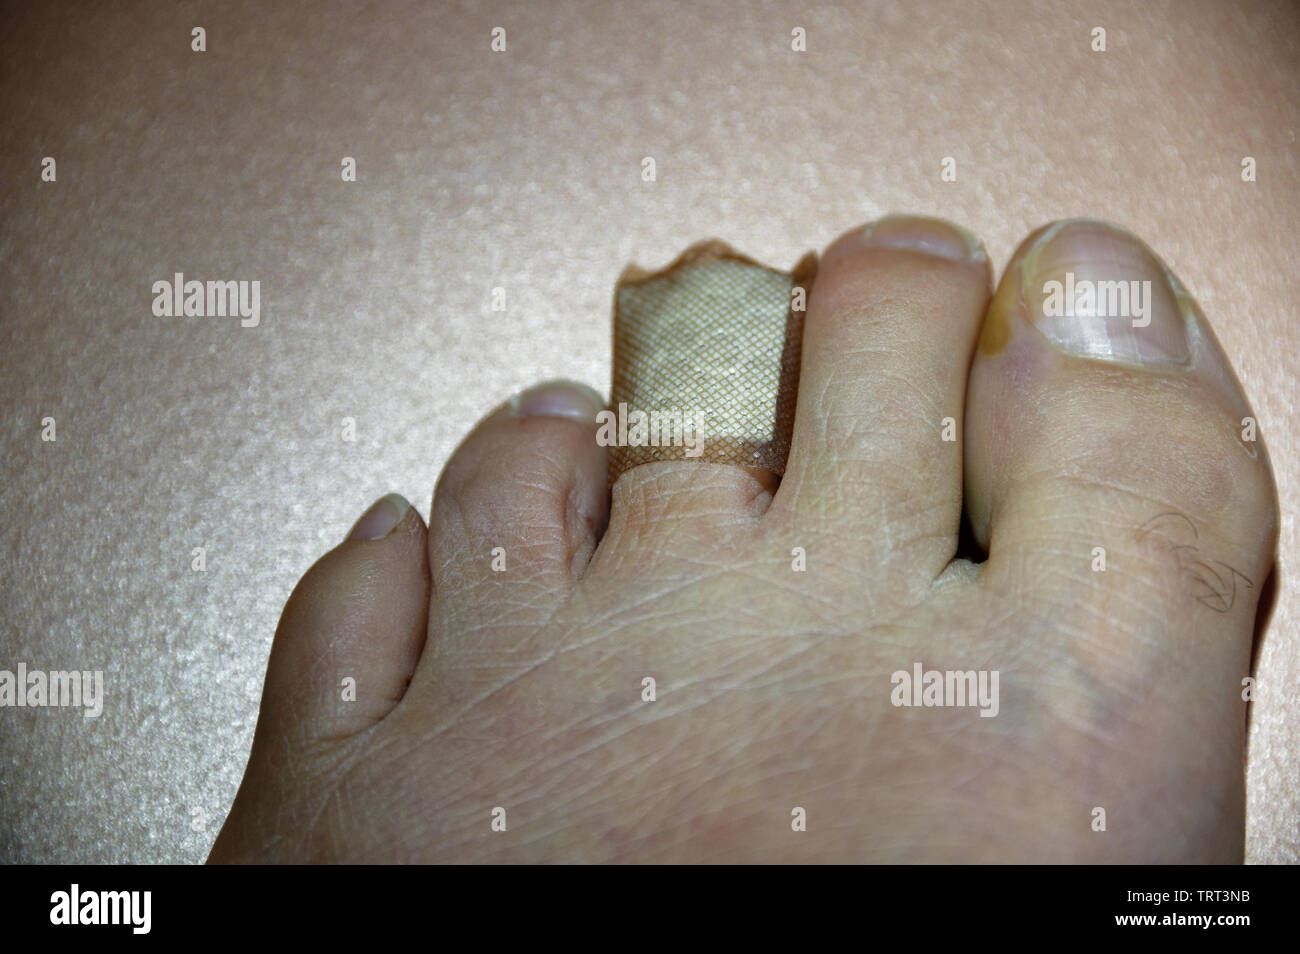 An injured toe is protected by a piece of sticking plaster Stock Photo